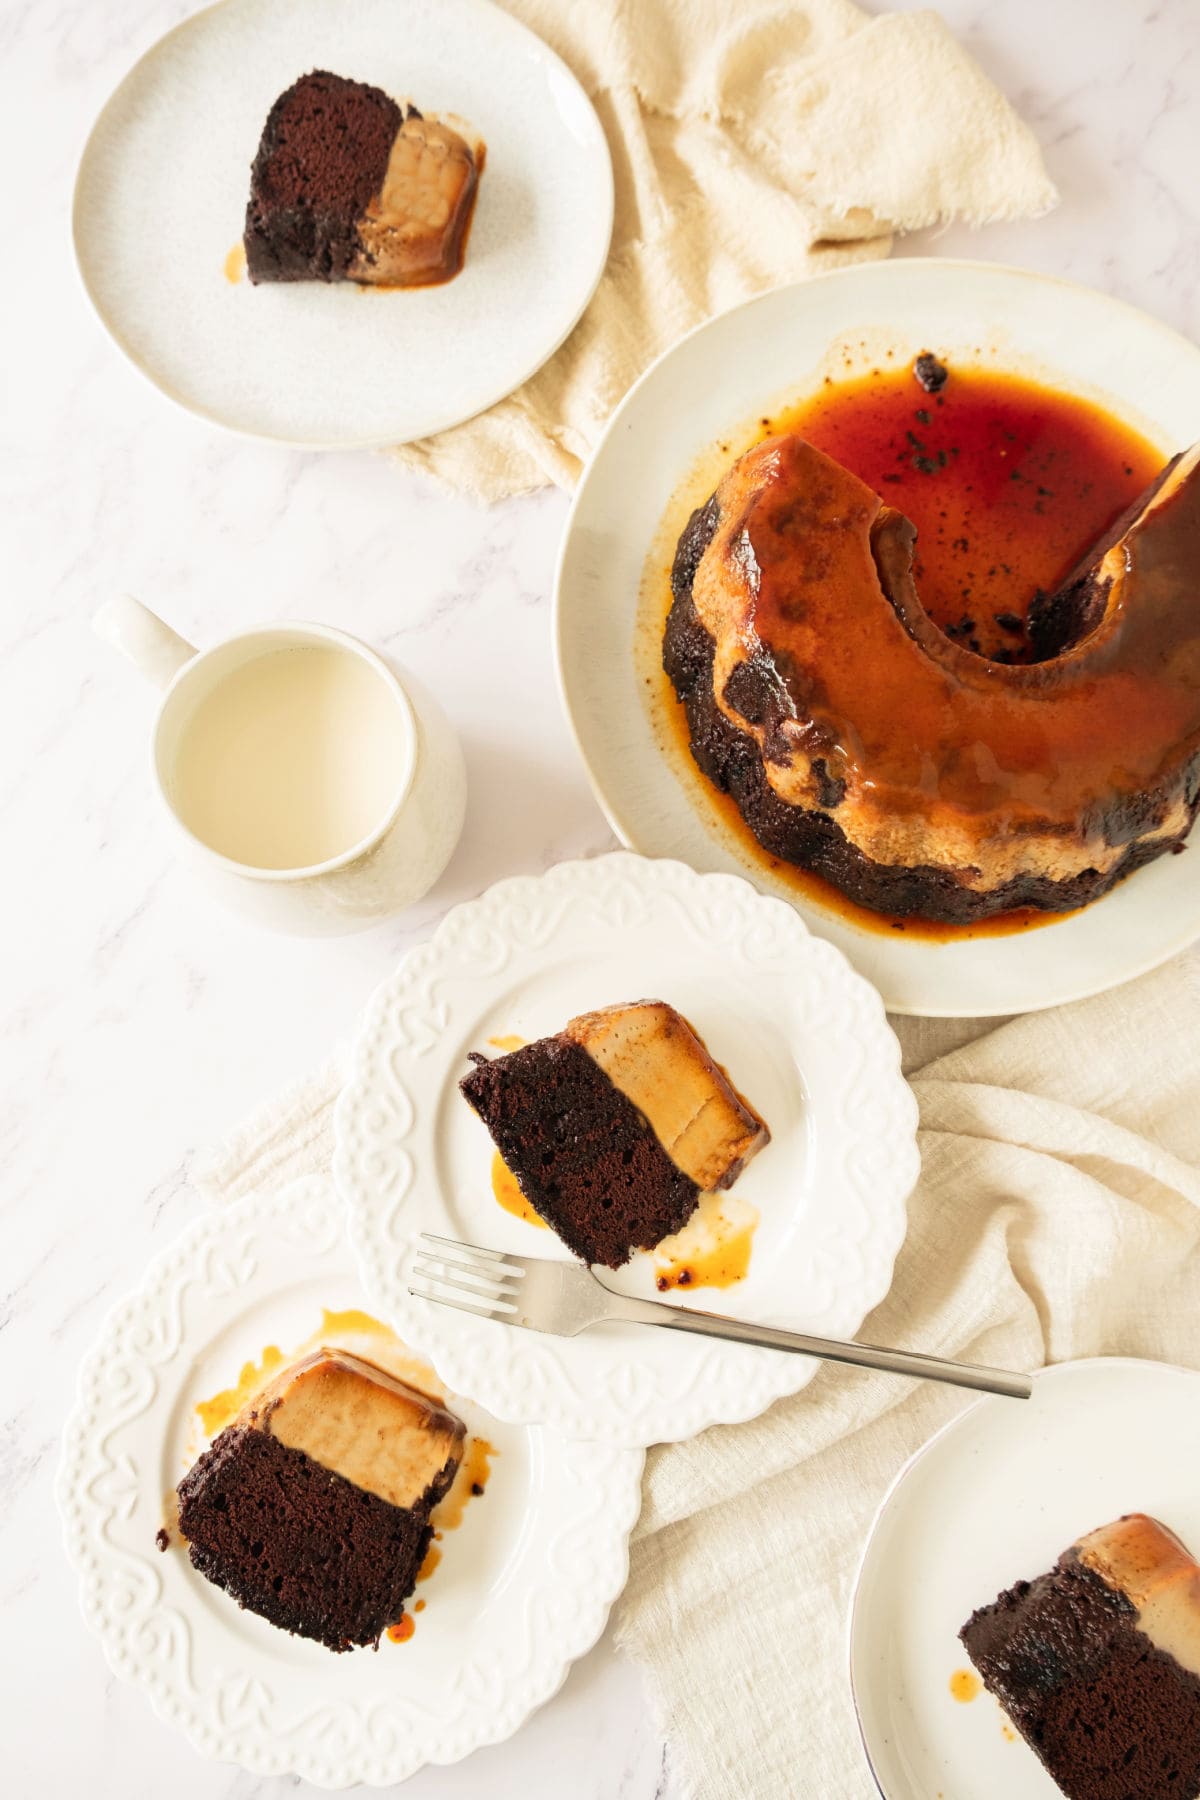 Several servings of chocoflan on white plates. Whole cake on platter. White surface.